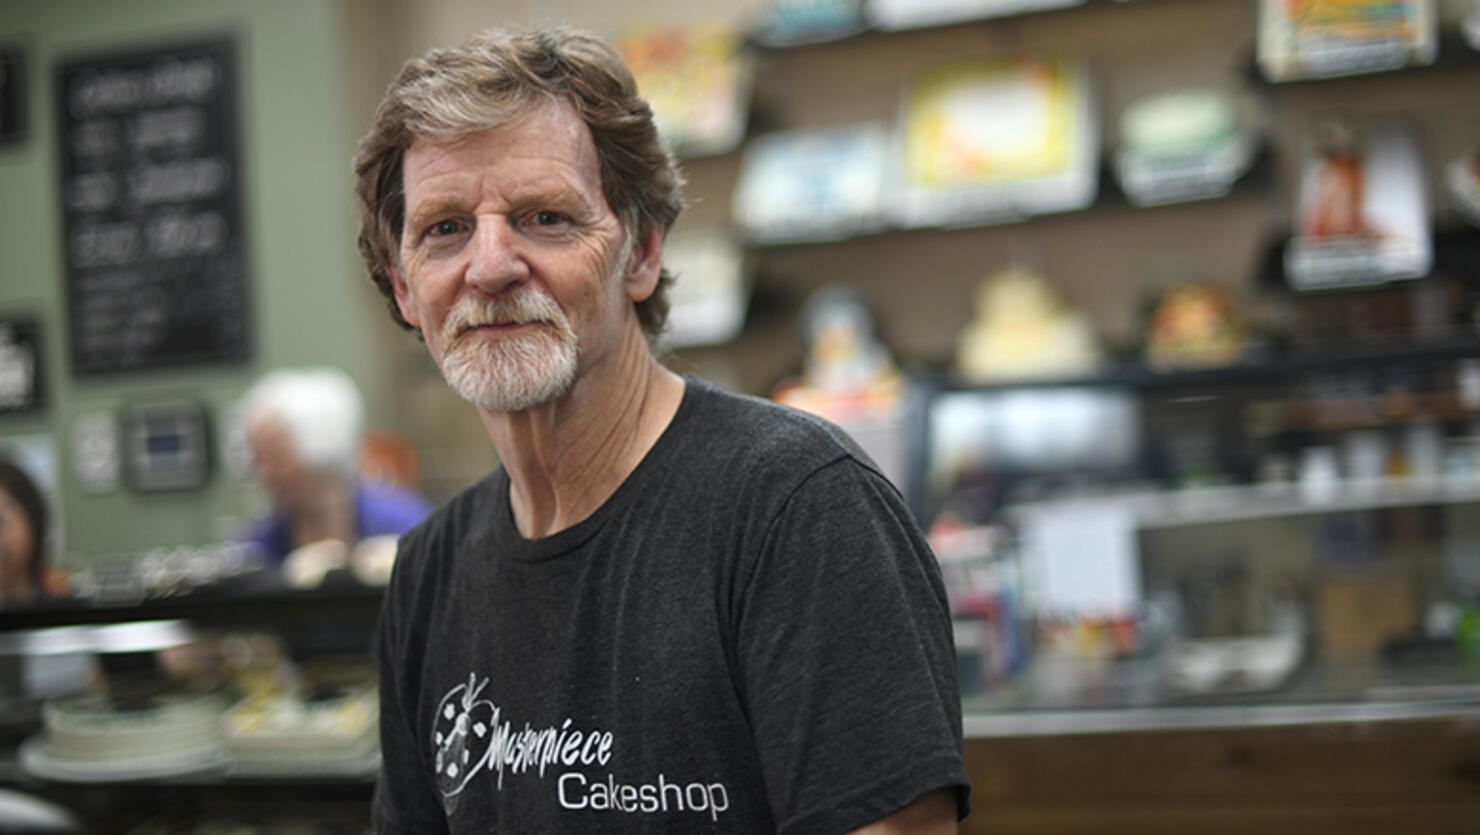  Baker Jack Phillips, owner of Masterpiece Cakeshop, manages his shop in Lakewood, Colorado